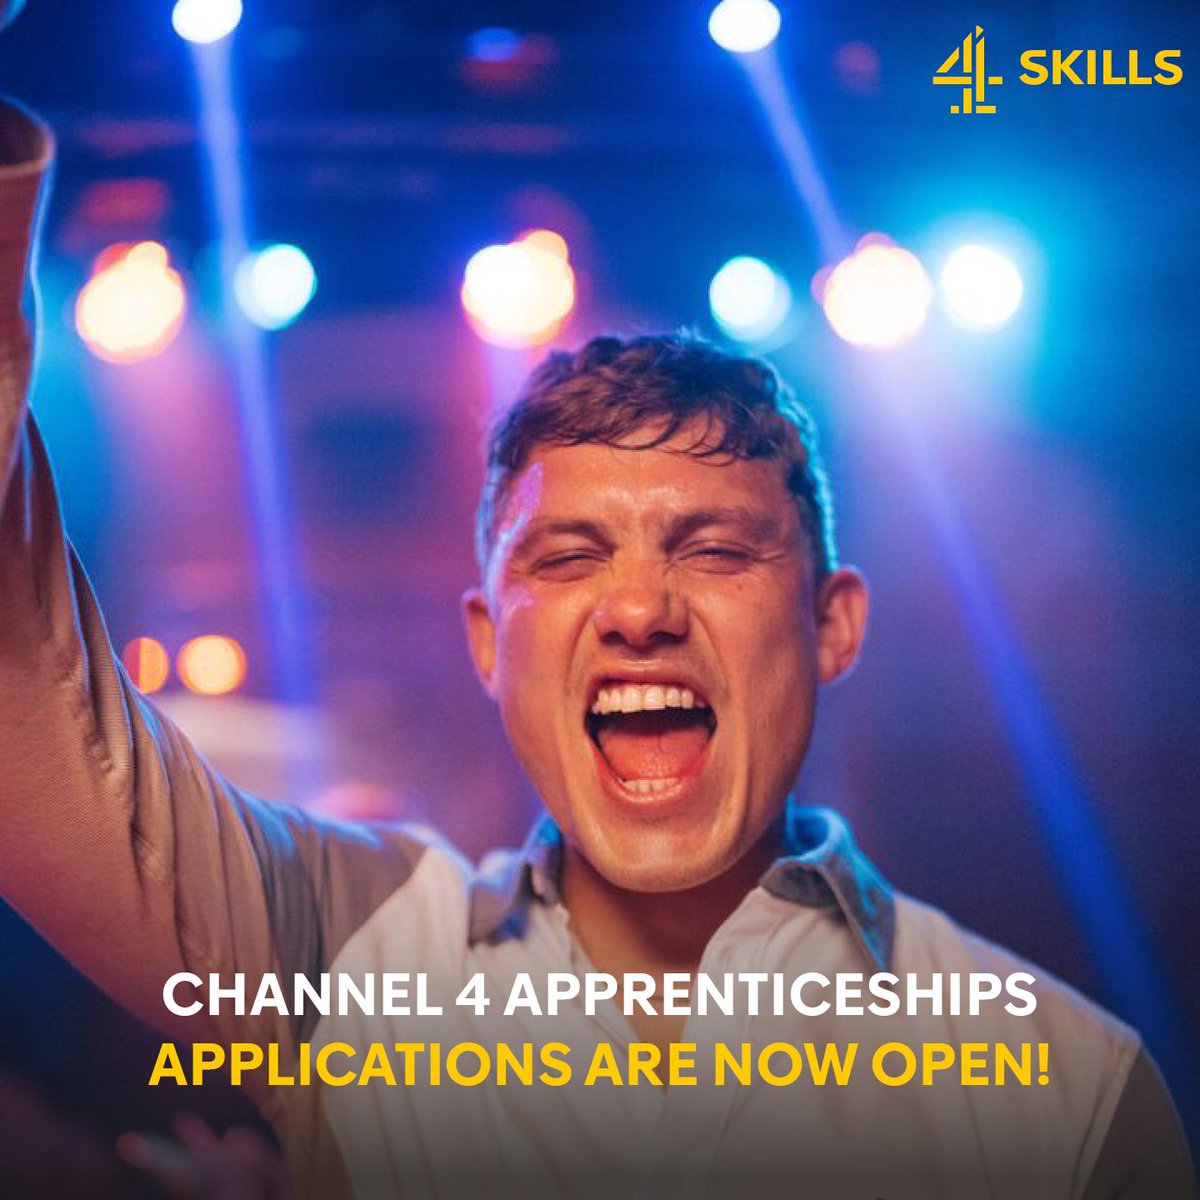 Channel 4 apprenticeships are now OPEN! We have 30+ roles available across our London, Leeds, Manchester, Glasgow and Bristol offices all starting in January 2025. Apply now by visiting careers.channel4.com/4skills/appren… & read our FAQ for more information! #apprenticeships #TVjobs